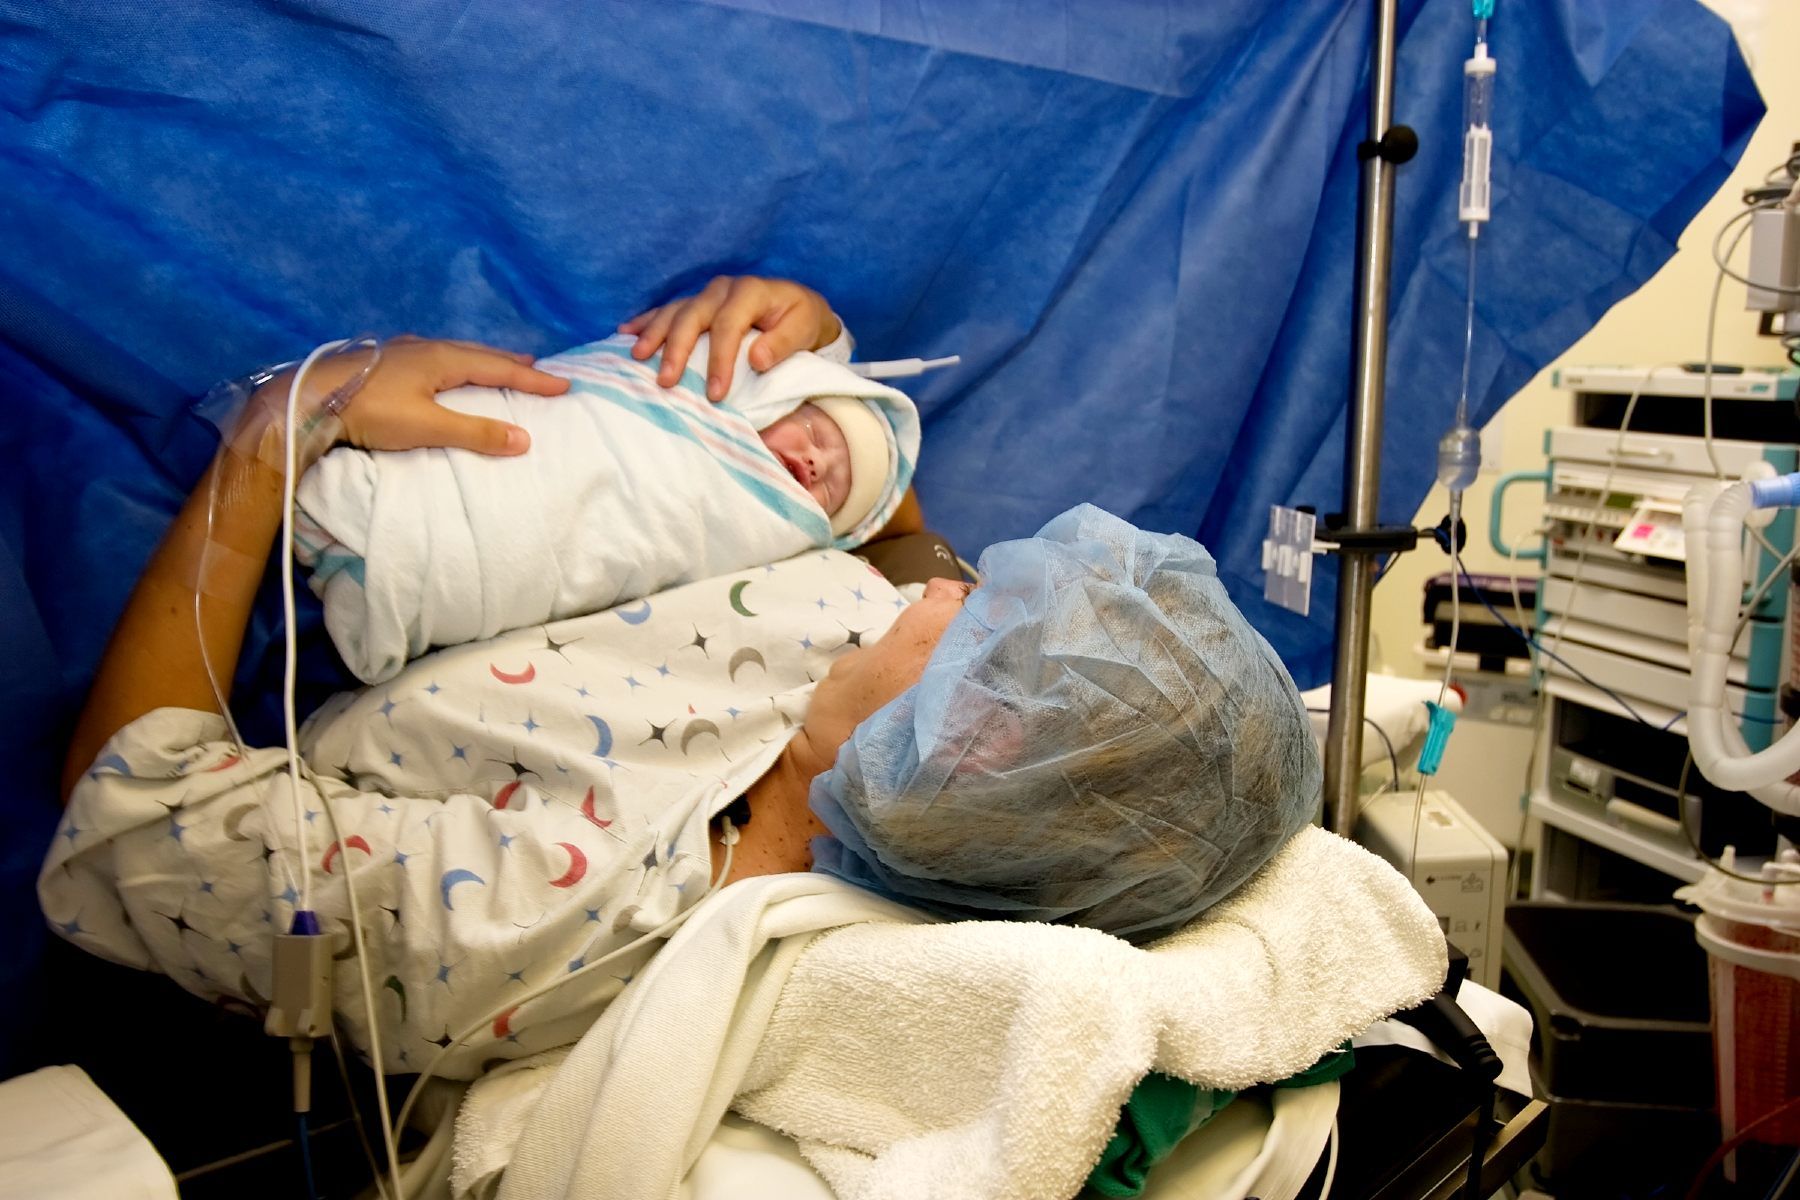 A mother examines her newborn baby in the delivery room - birth injury lawsuit